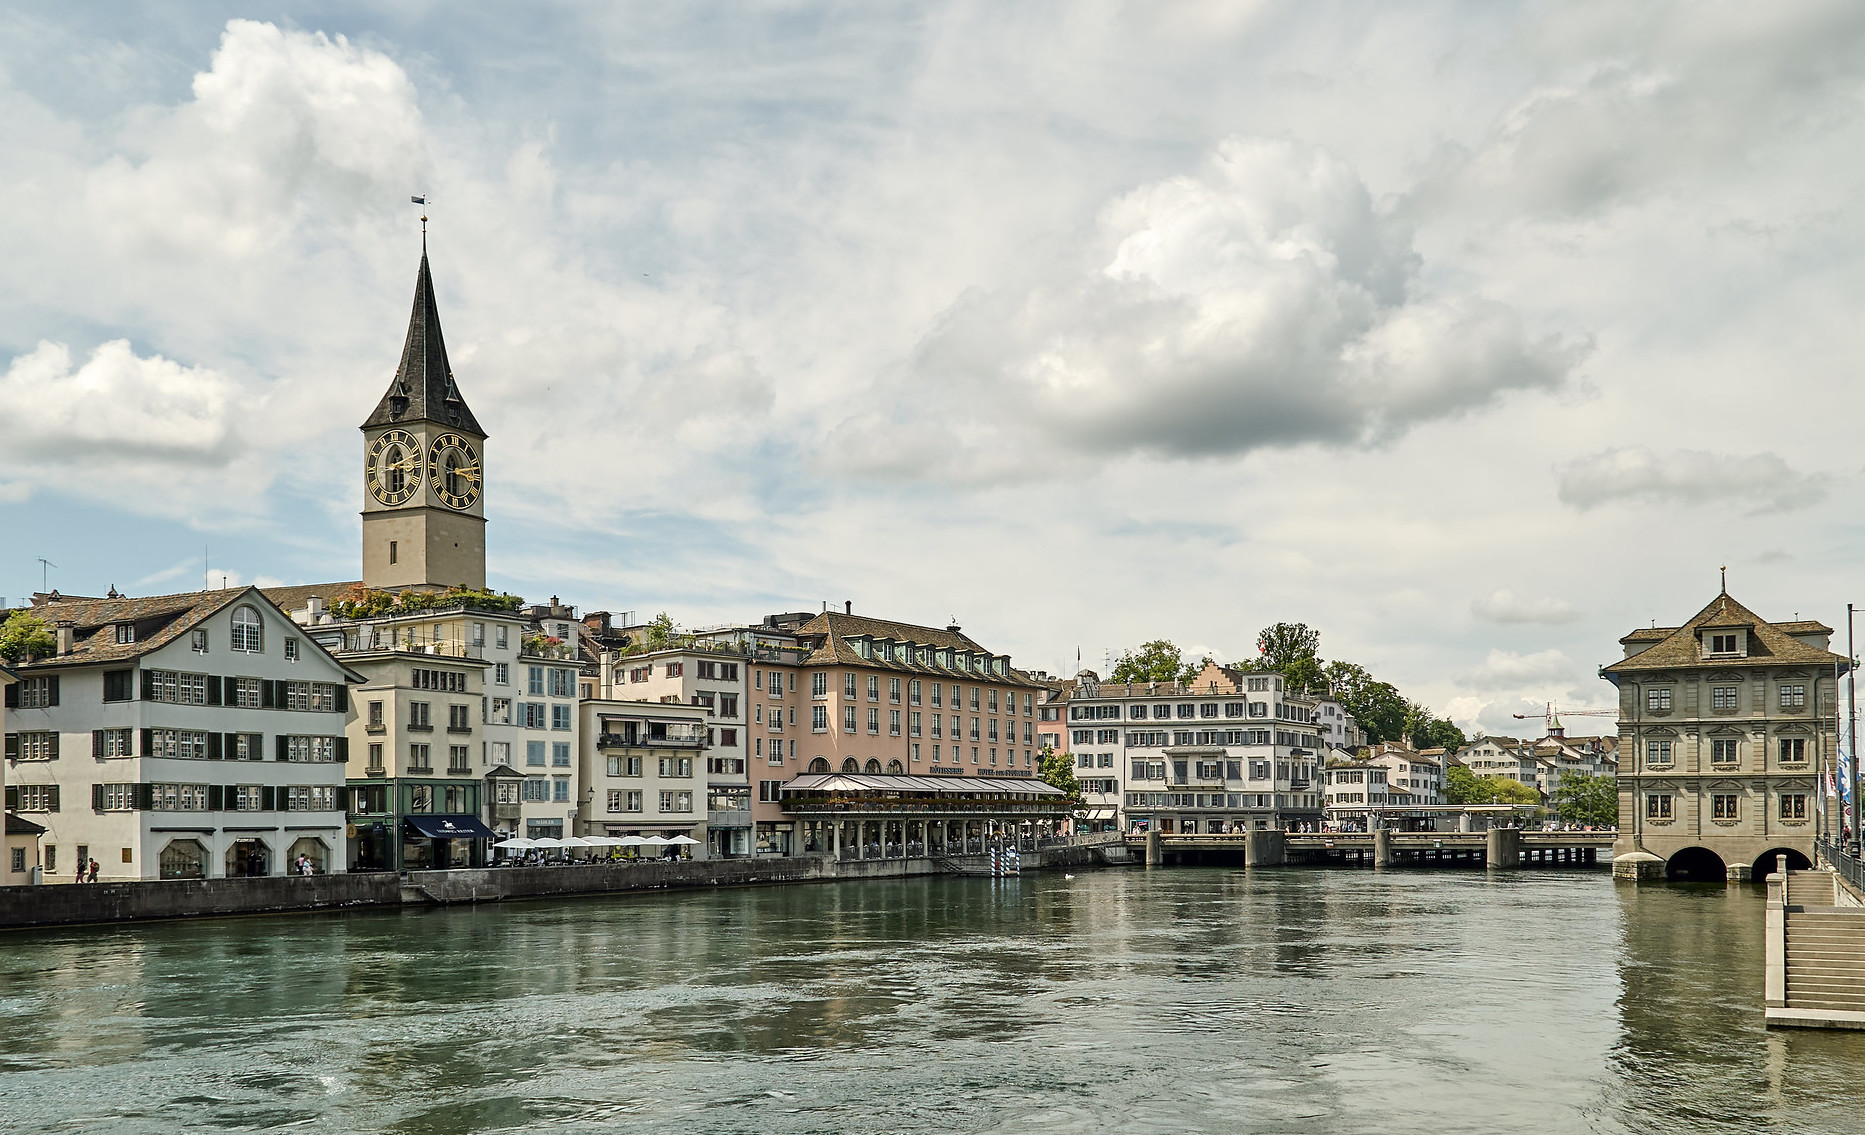 Zurich has been ranked as the best city for the world’s super-wealthy